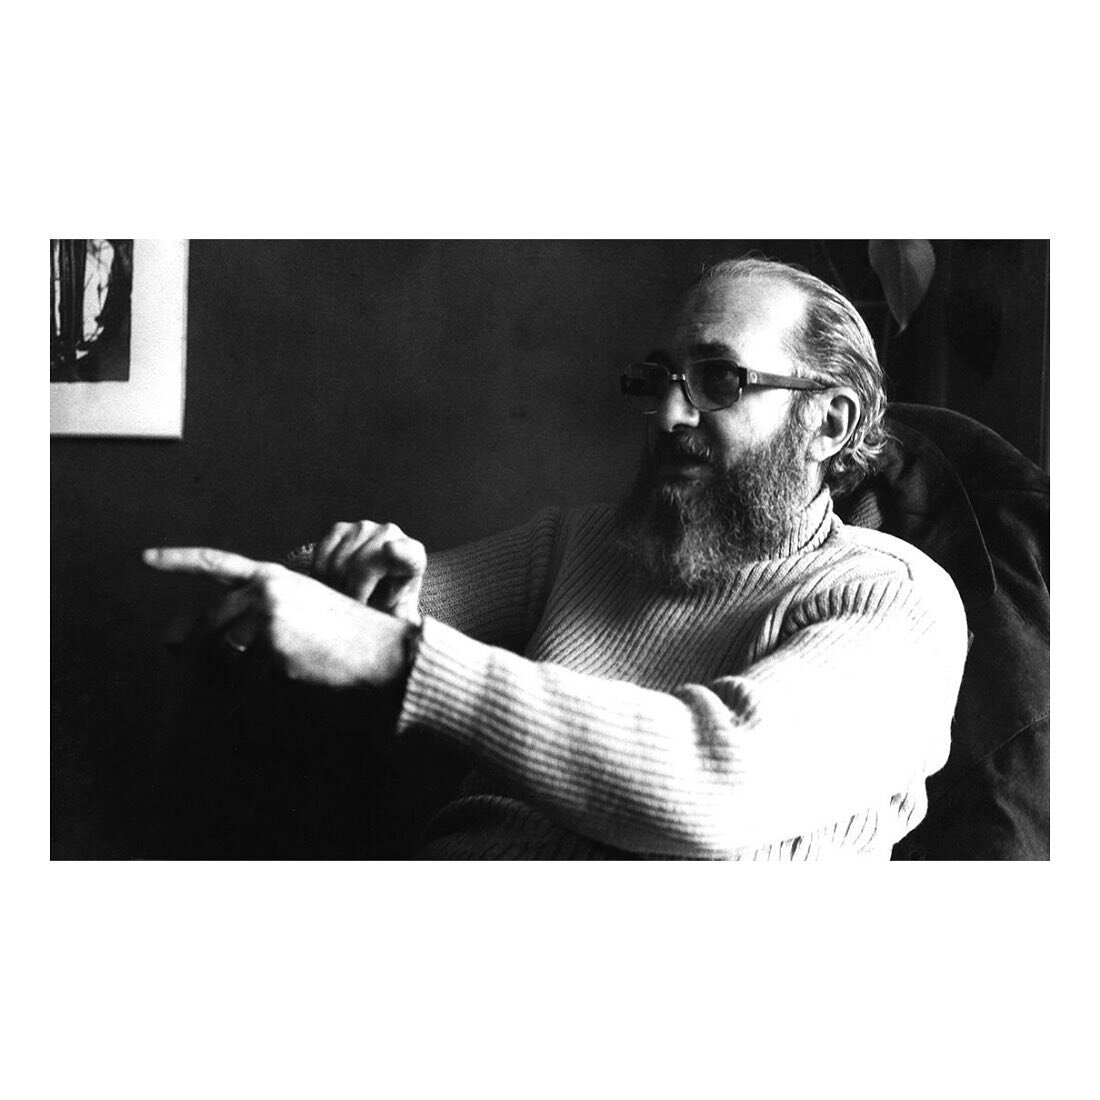 Brazilian philosopher #PauloFreire on education:

&ldquo;Liberating education consists in acts of cognition, not transferals of information.&rdquo;

&ldquo;The teacher is of course an artist, but being an artist does not mean that he or she can make 